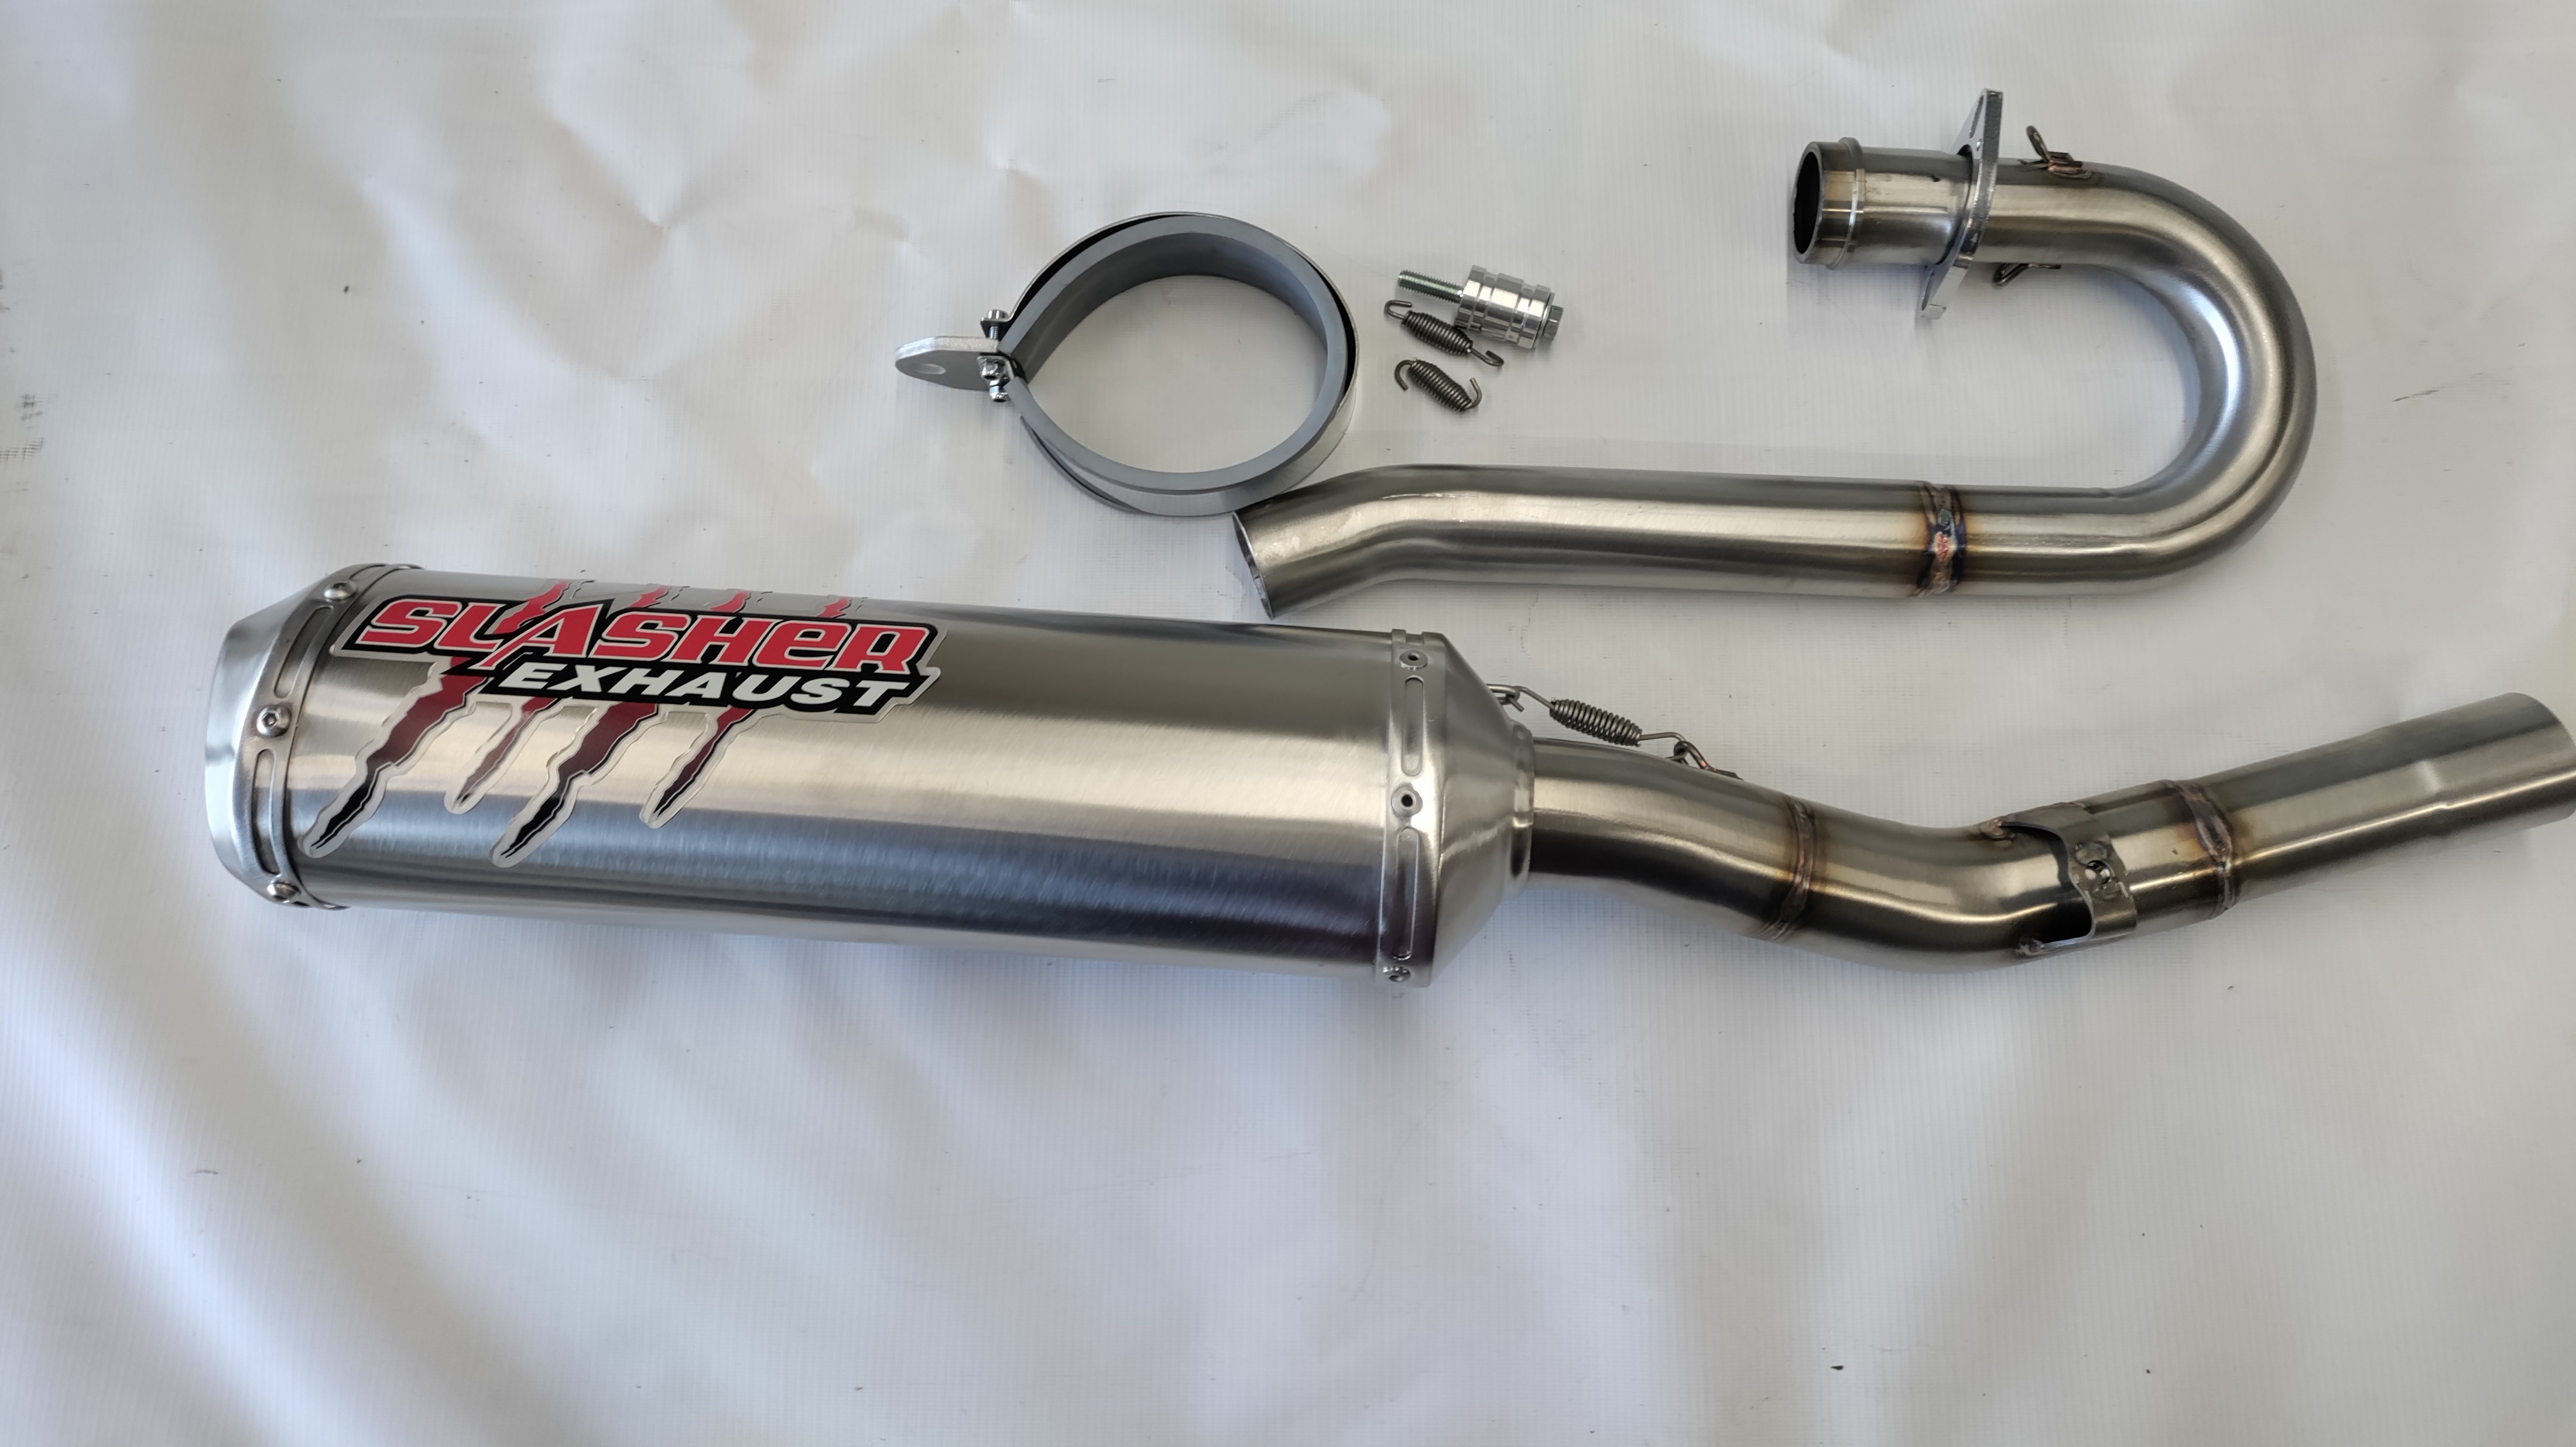 Stainless Full Exhaust w/ Spark Arrestor - For 09-15 Kawasaki KX450F - Click Image to Close